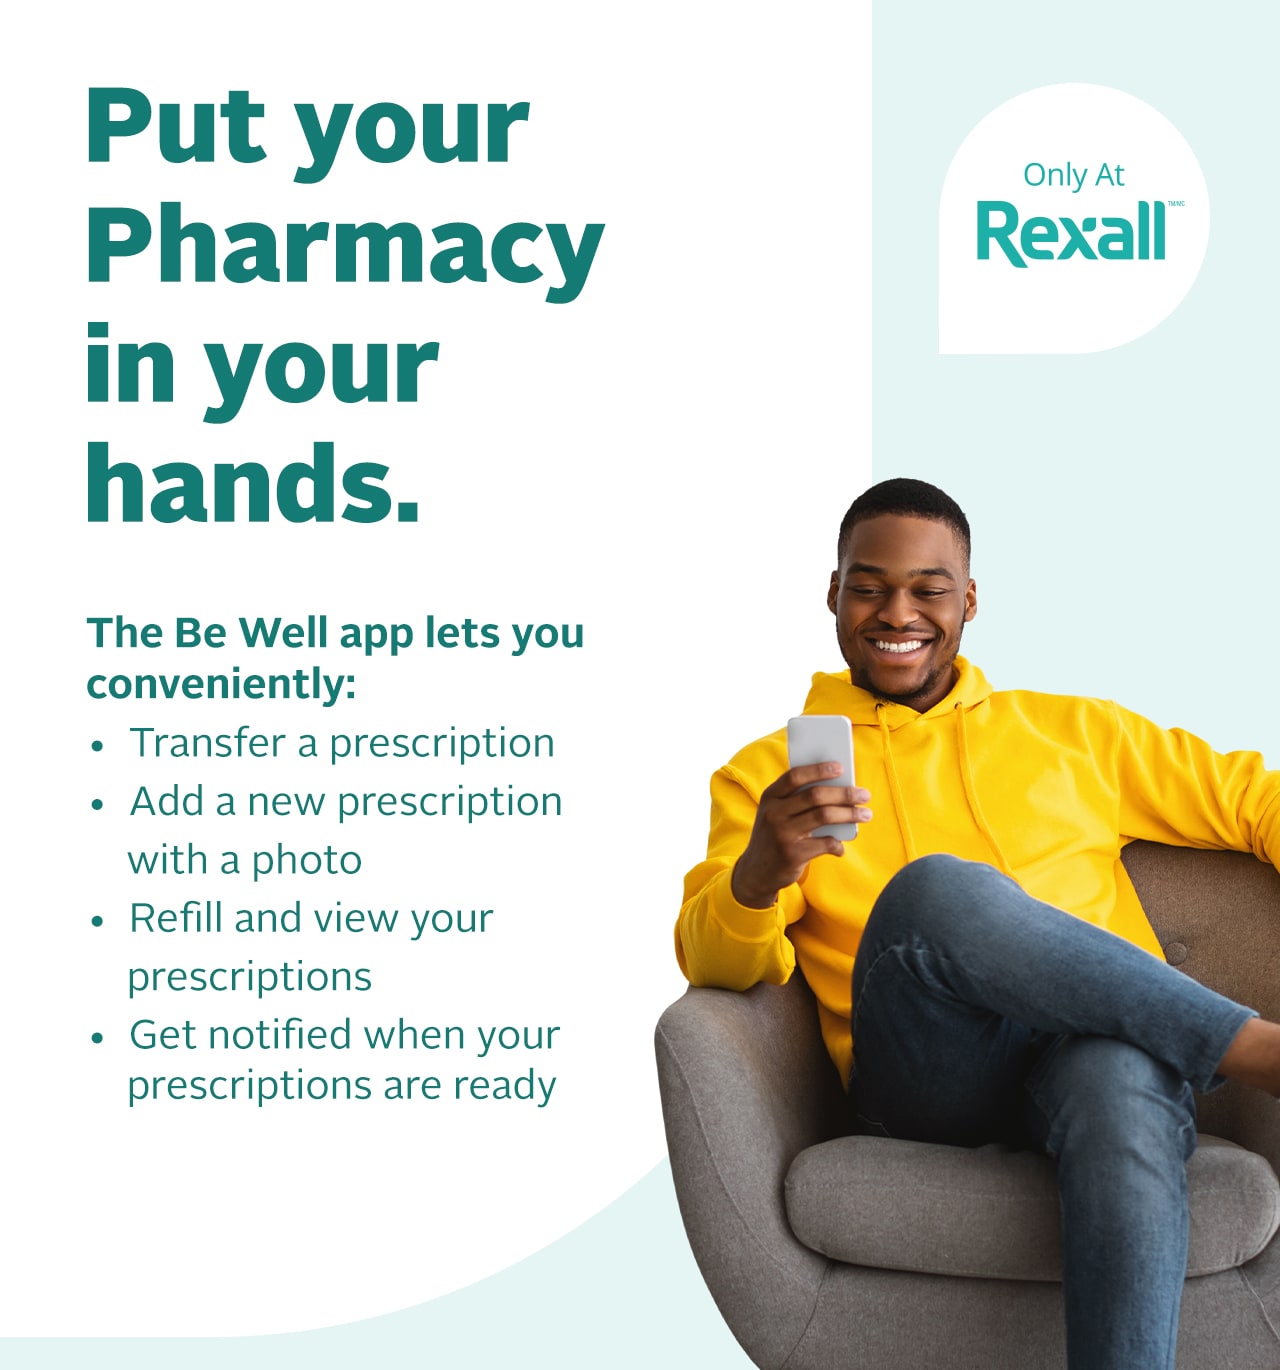 Put your Rexall Pharmacy in your hands - $10 incentive (phone)